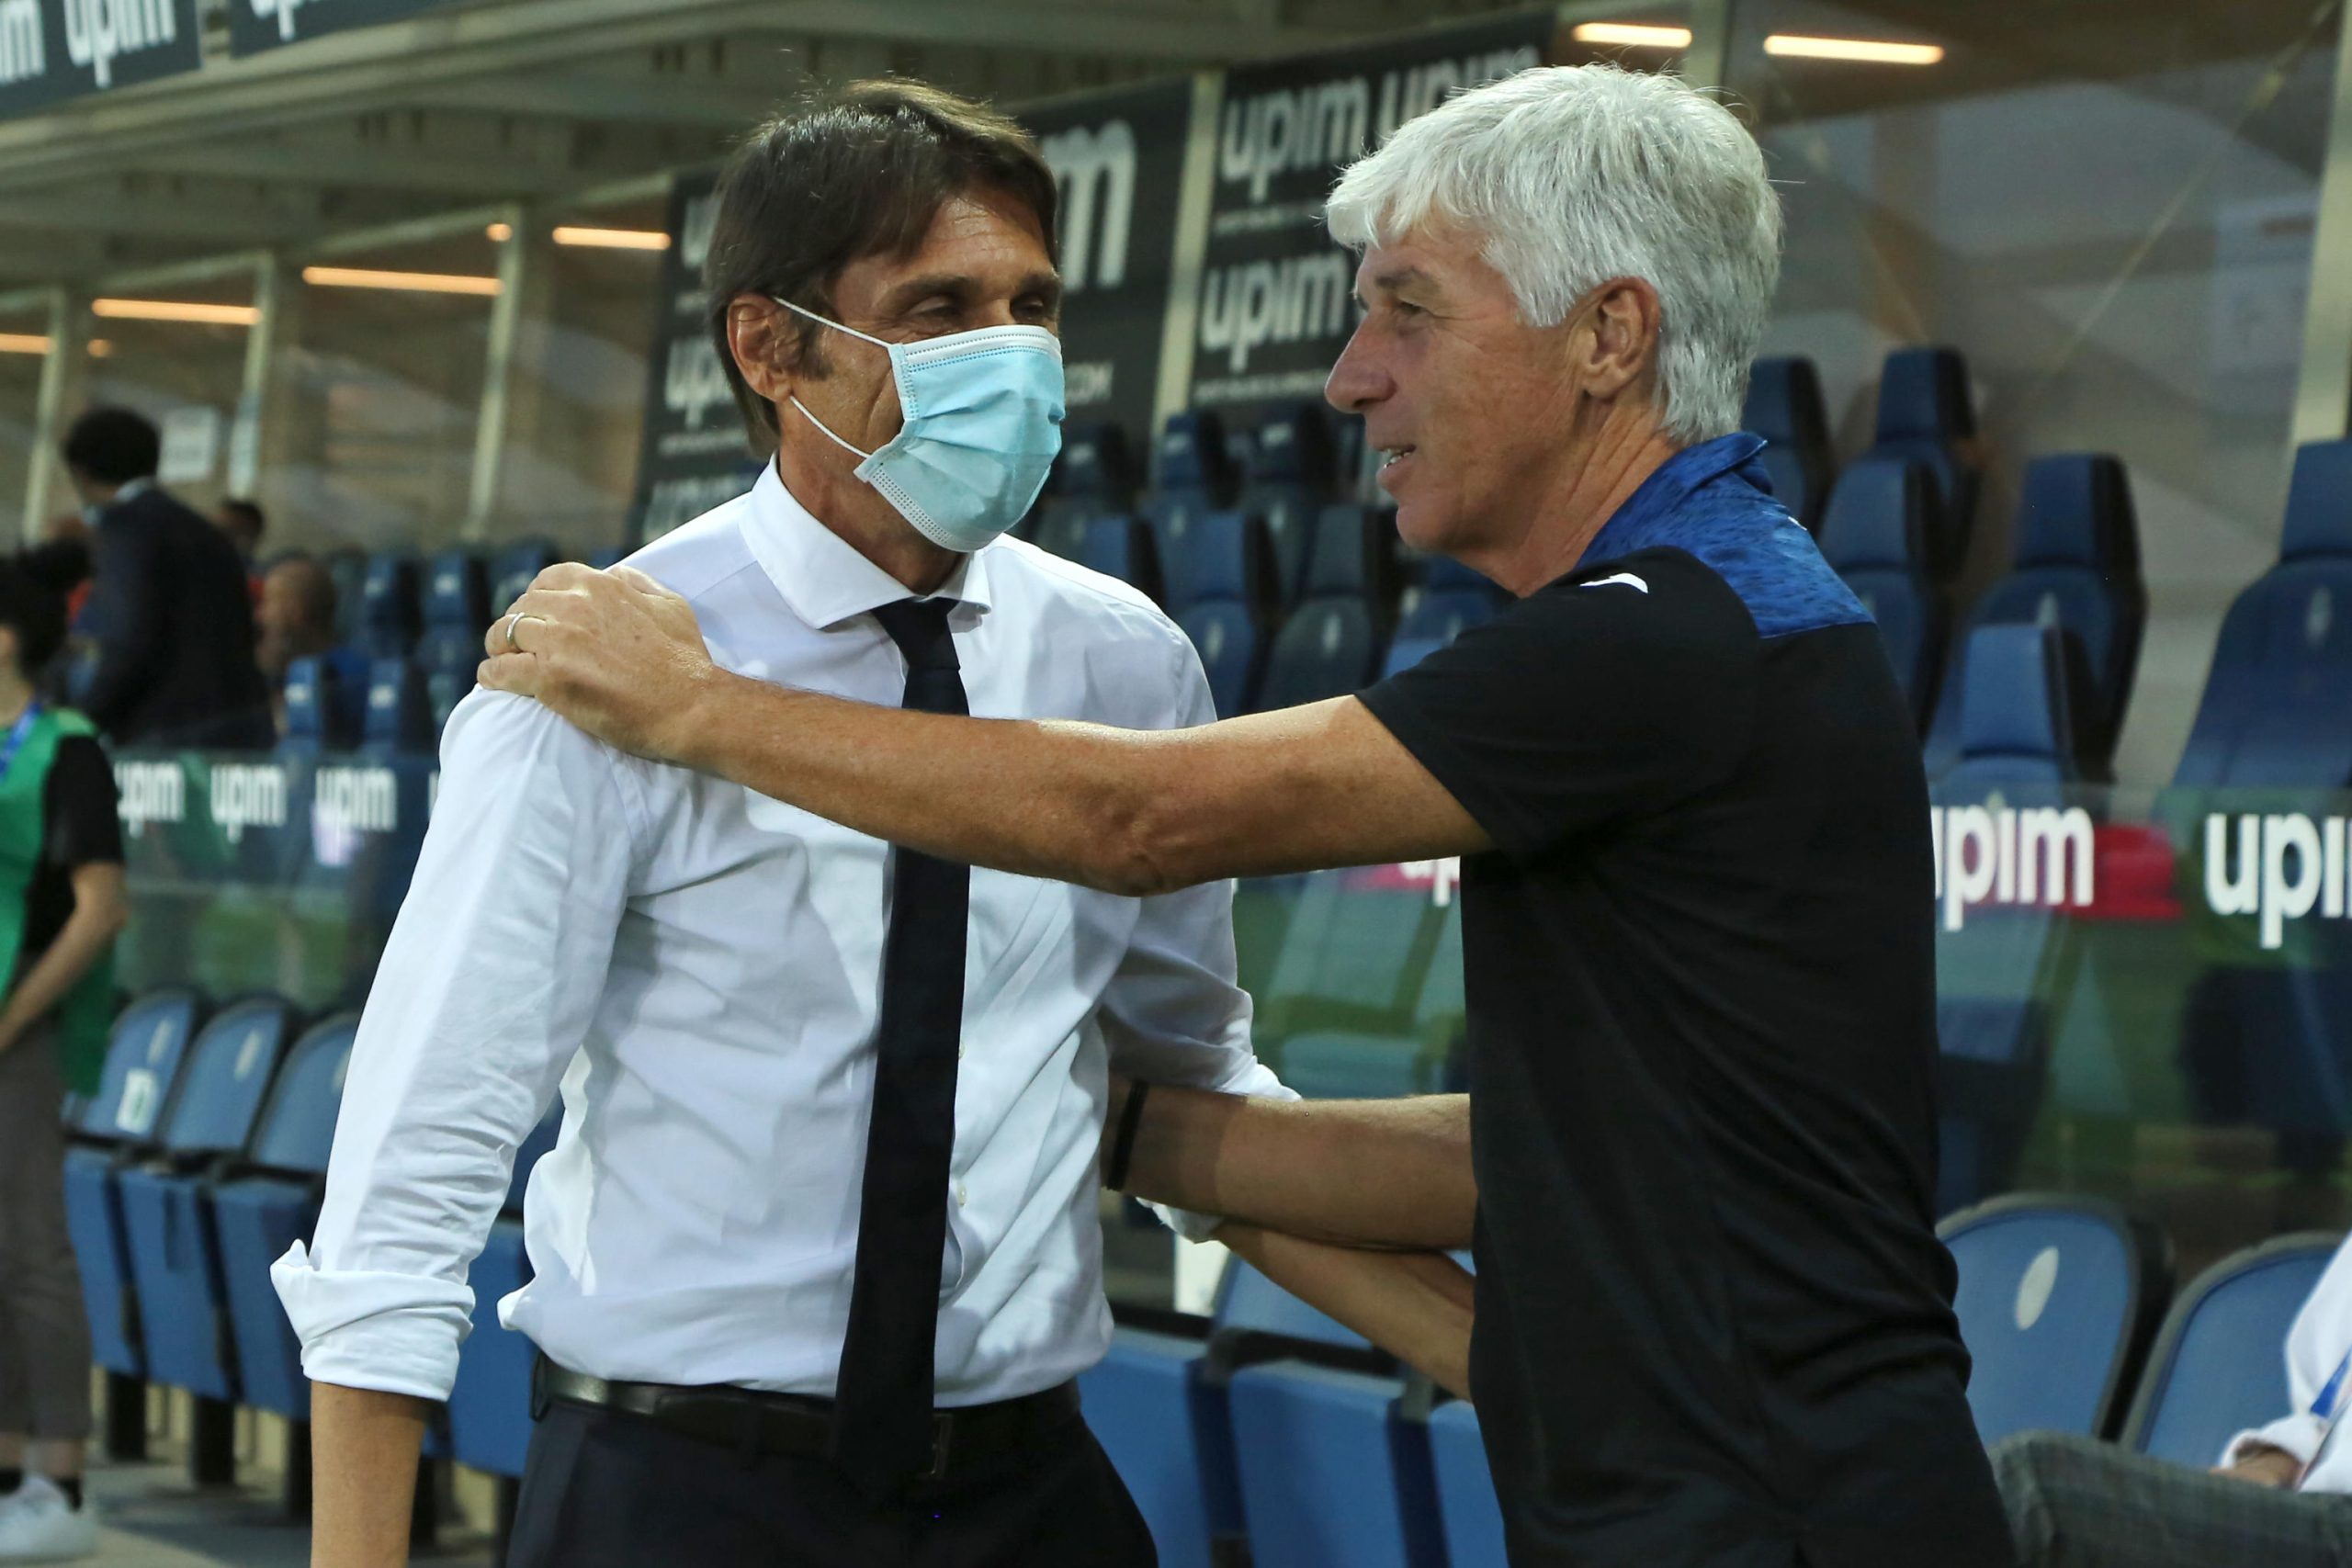 Conte or Gasperini: who is Juventus’ ideal replacement for Allegri?